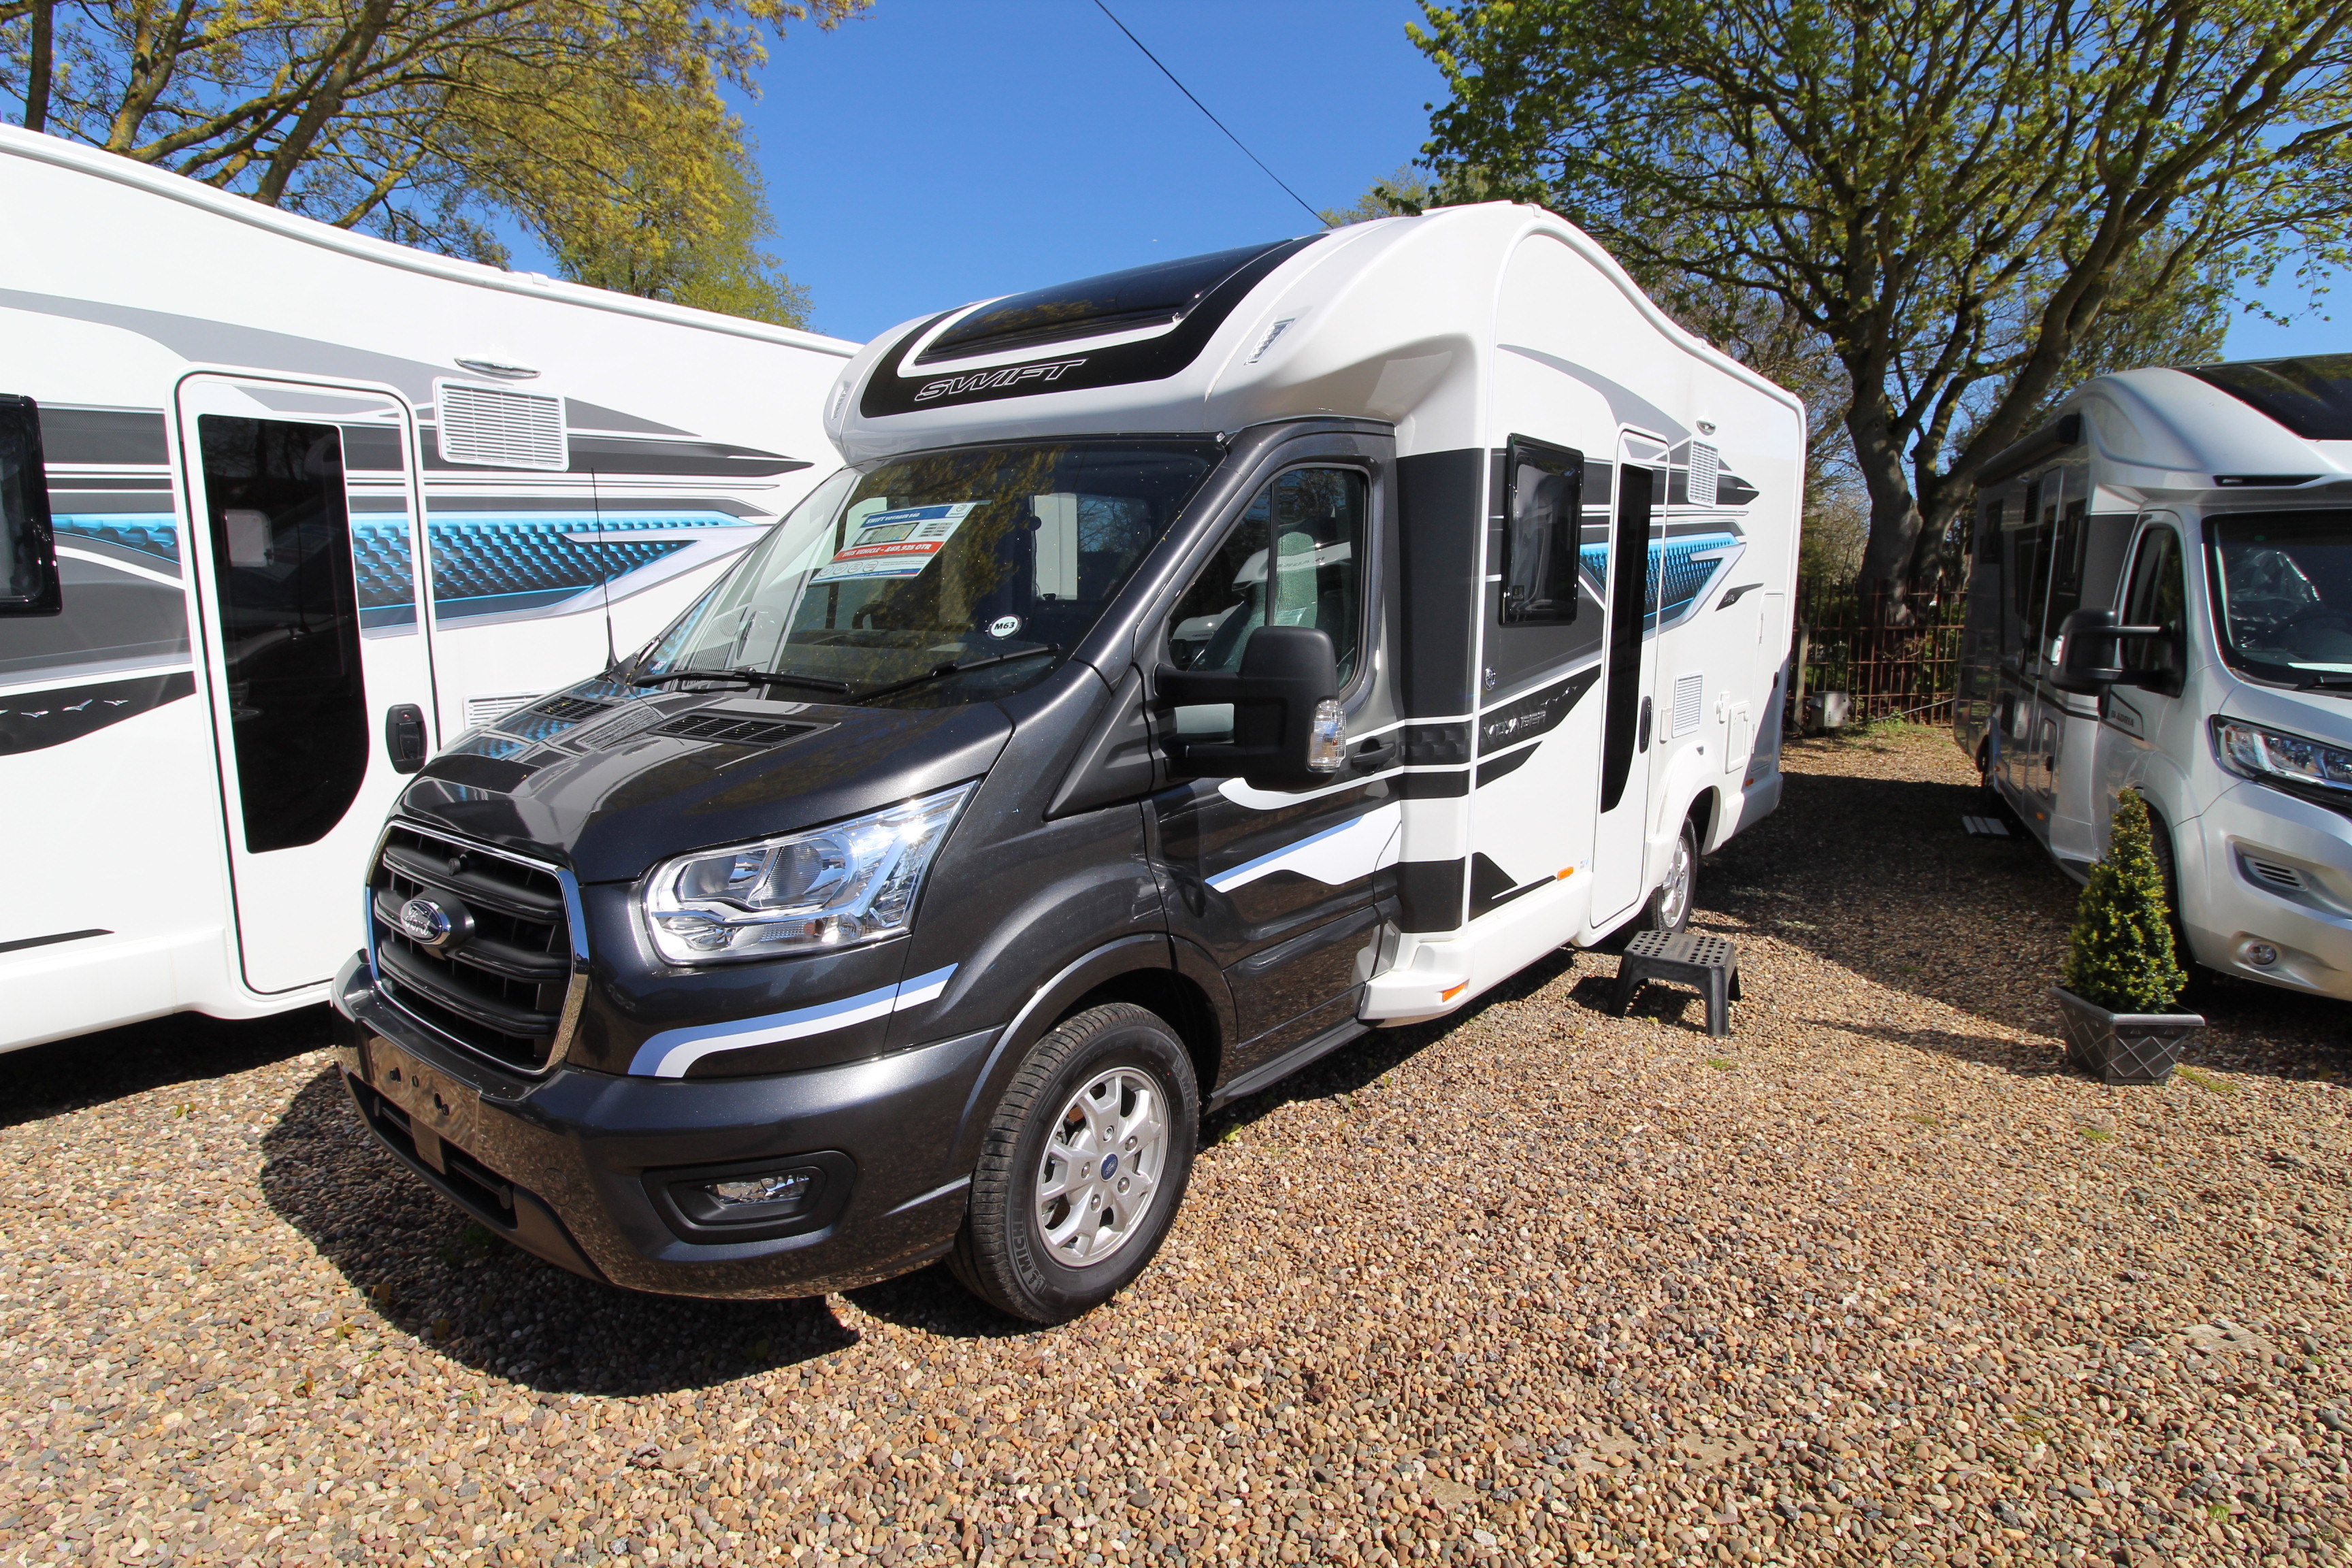 2023 Swift Voyager 540 Auto motorhome available at Wandahome, South Cave  Wandahome (South Cave) Ltd